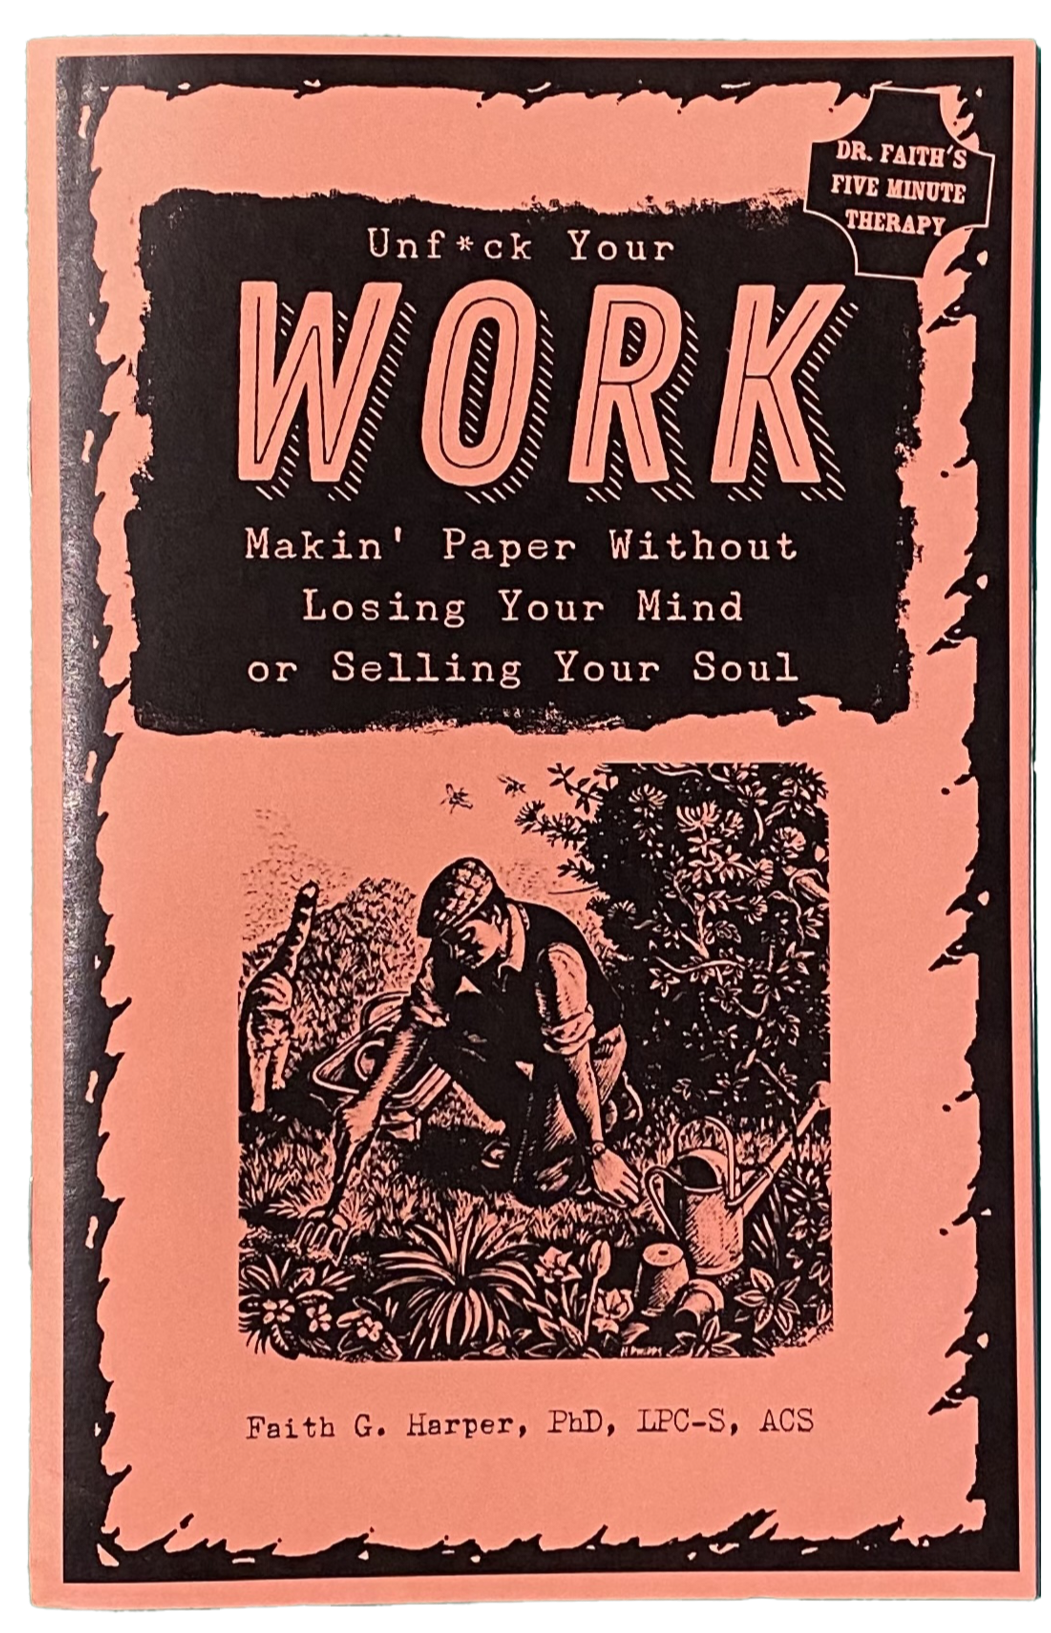 Book cover of Unfuck Your Work, makin' paper without losing your mind or selling your soul, by Faith G Harper.